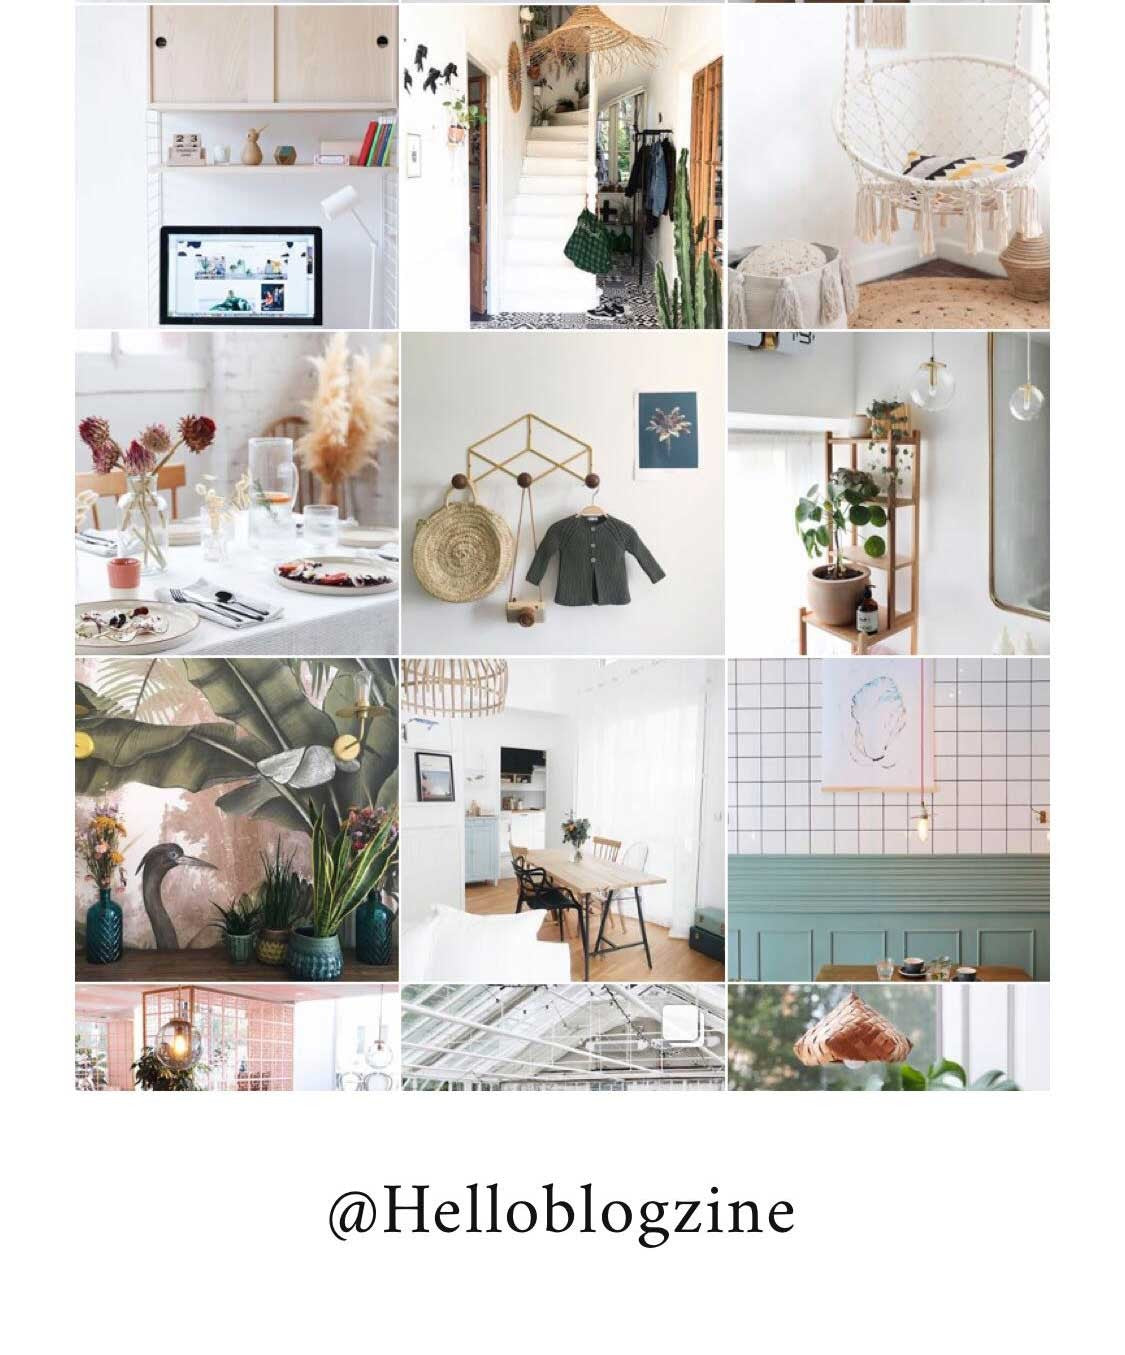 Instagram account for daily kitchen inspiration. 